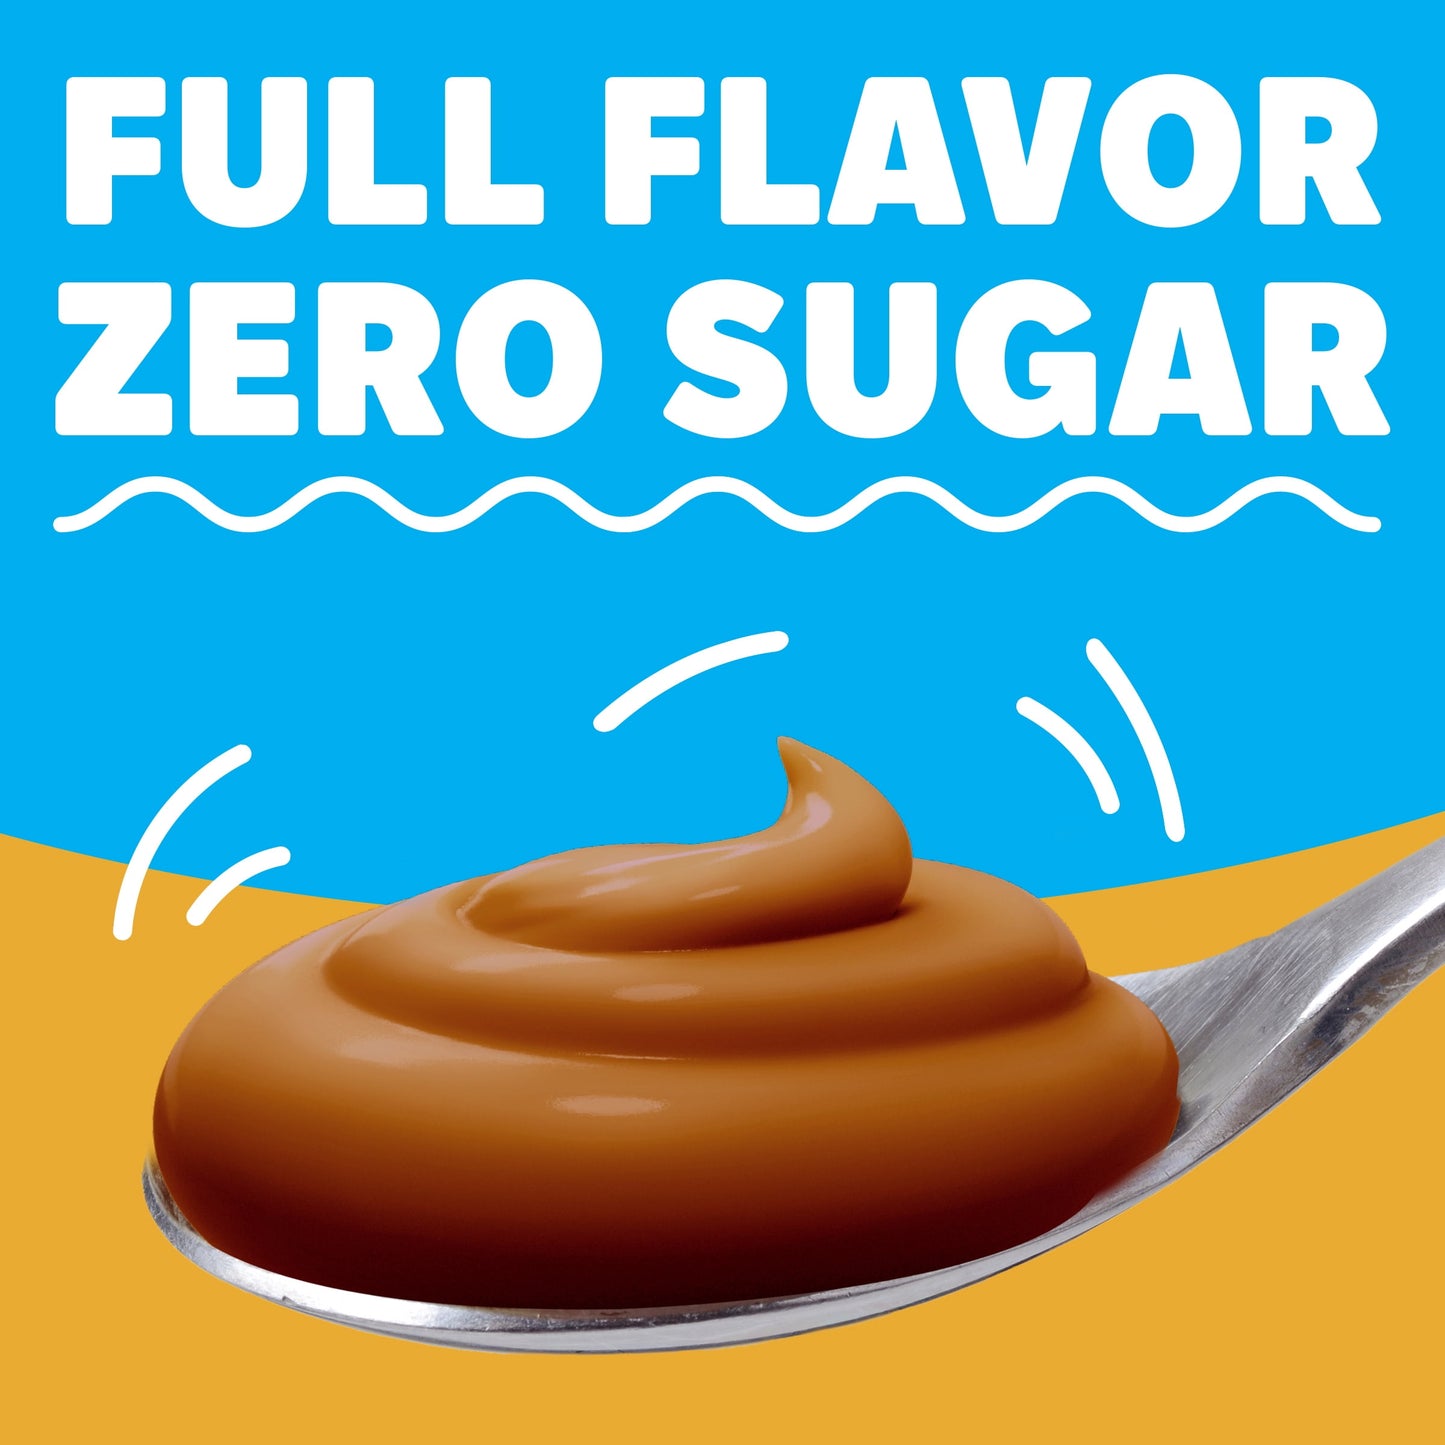 Jell-O Butterscotch Artificially Flavored Zero Sugar Instant Reduced Calorie Pudding & Pie Filling Mix, 1 oz Box